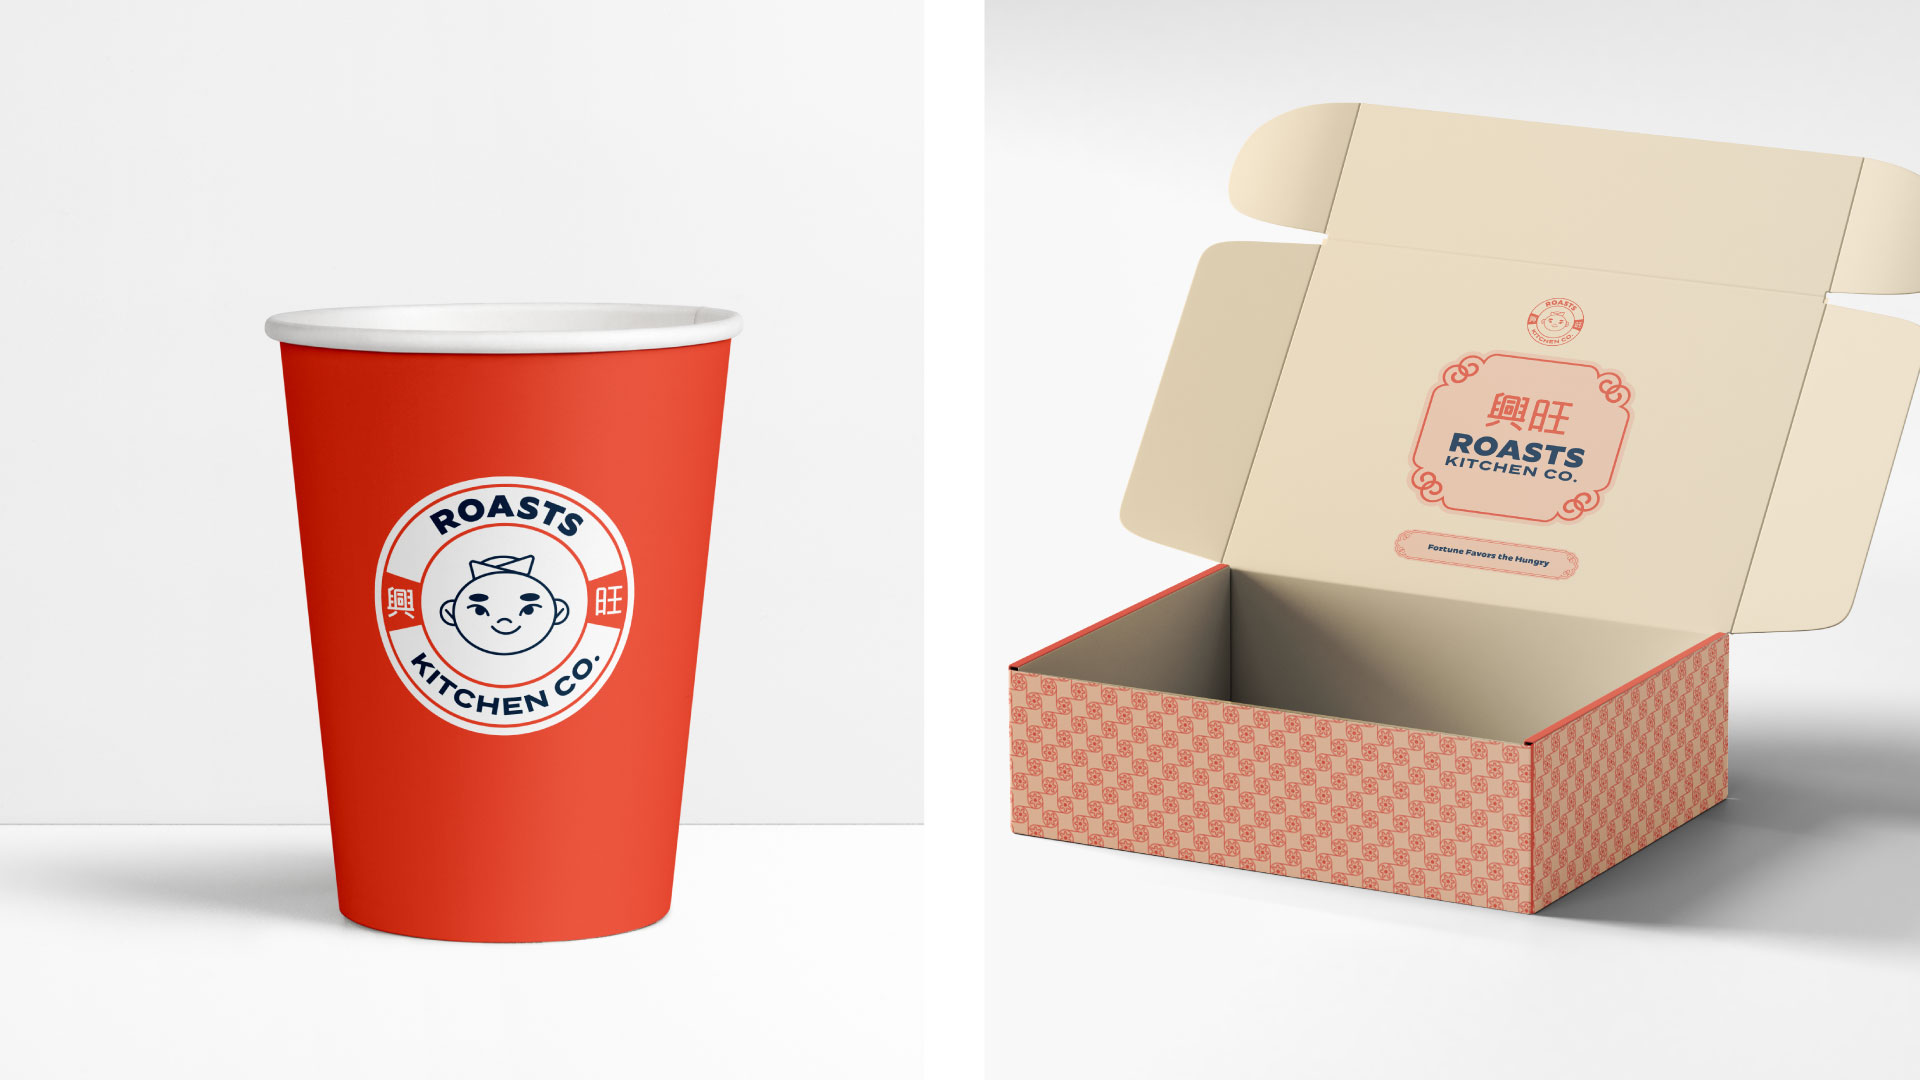 Dine in and take out food packaging for Hong Kong roasts restaurant Roasts Kitchen Company